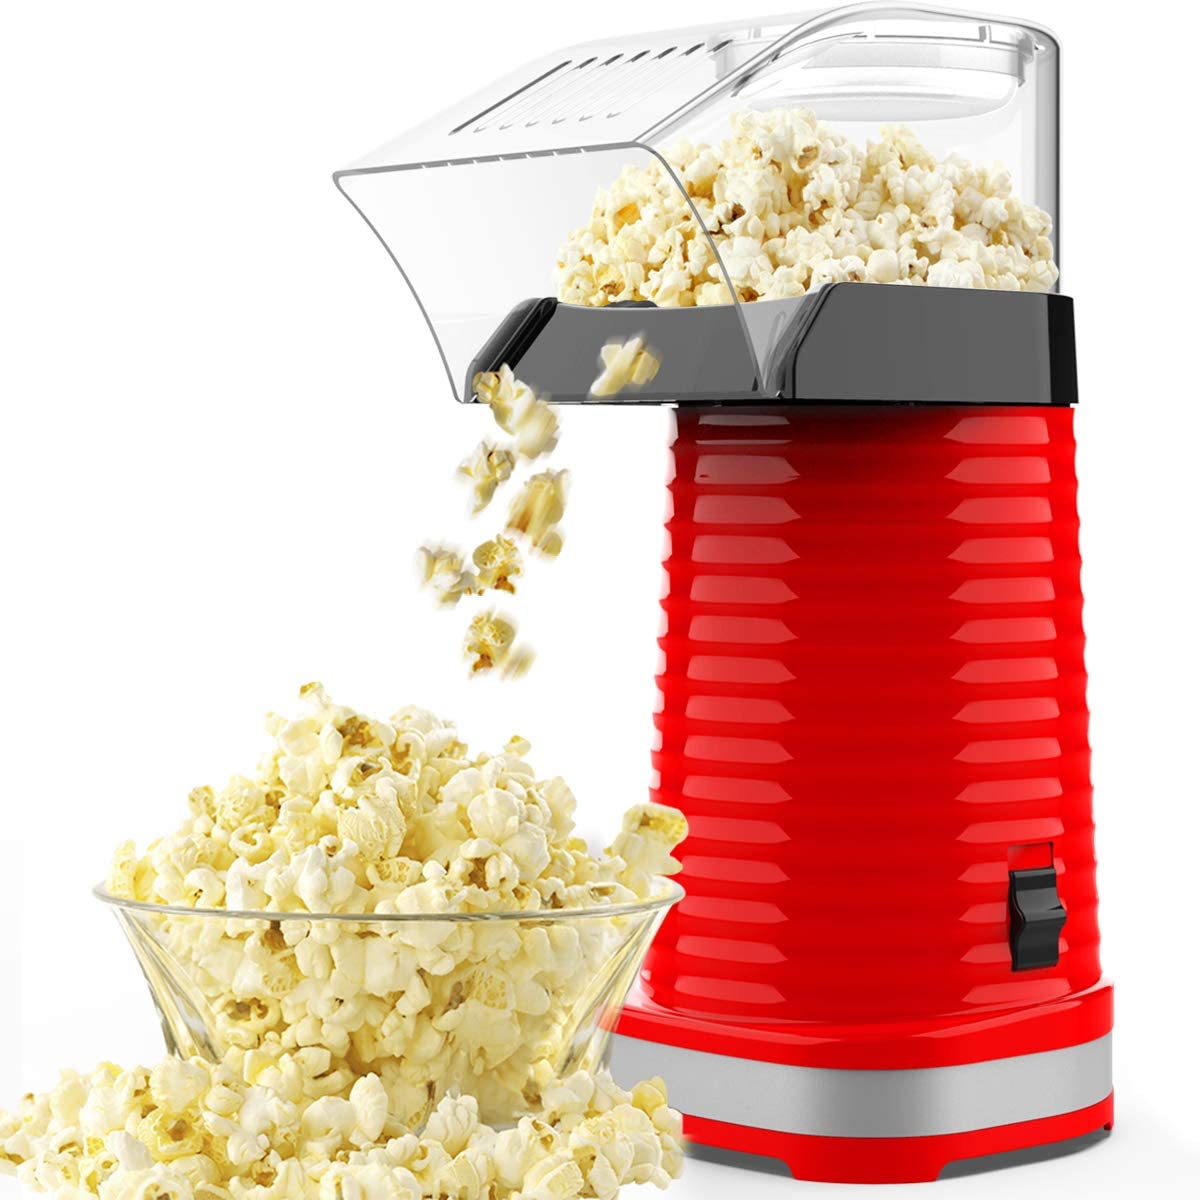 Including Measuring Cup and Removable Lid Hot Air Popcorn Maker,Popcorn Machine,Popcorn Popper 1200W,No Oil Needed 